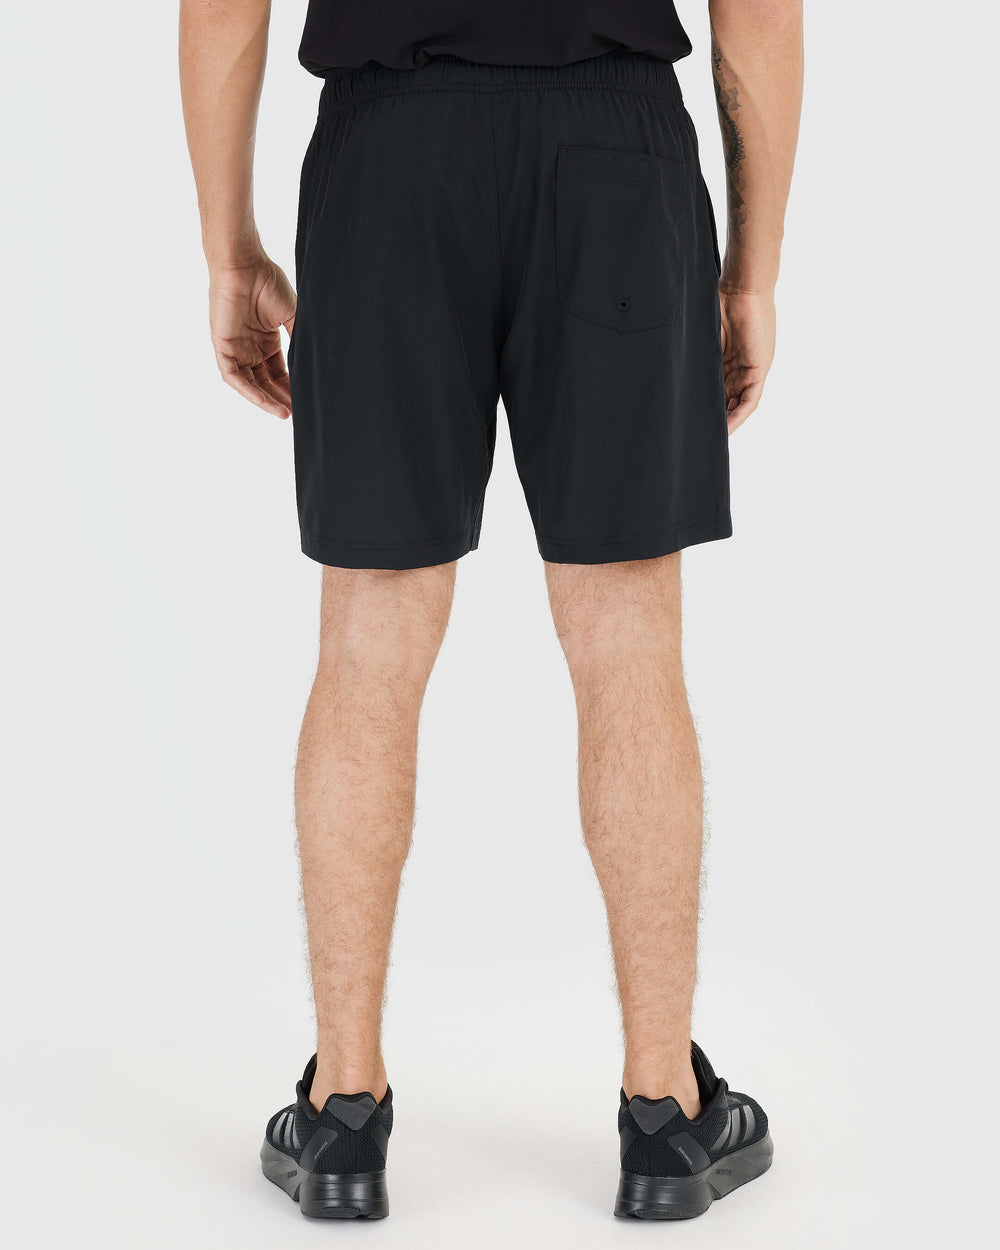 Dark Active Quick Dry Shorts with Liner 3-Pack